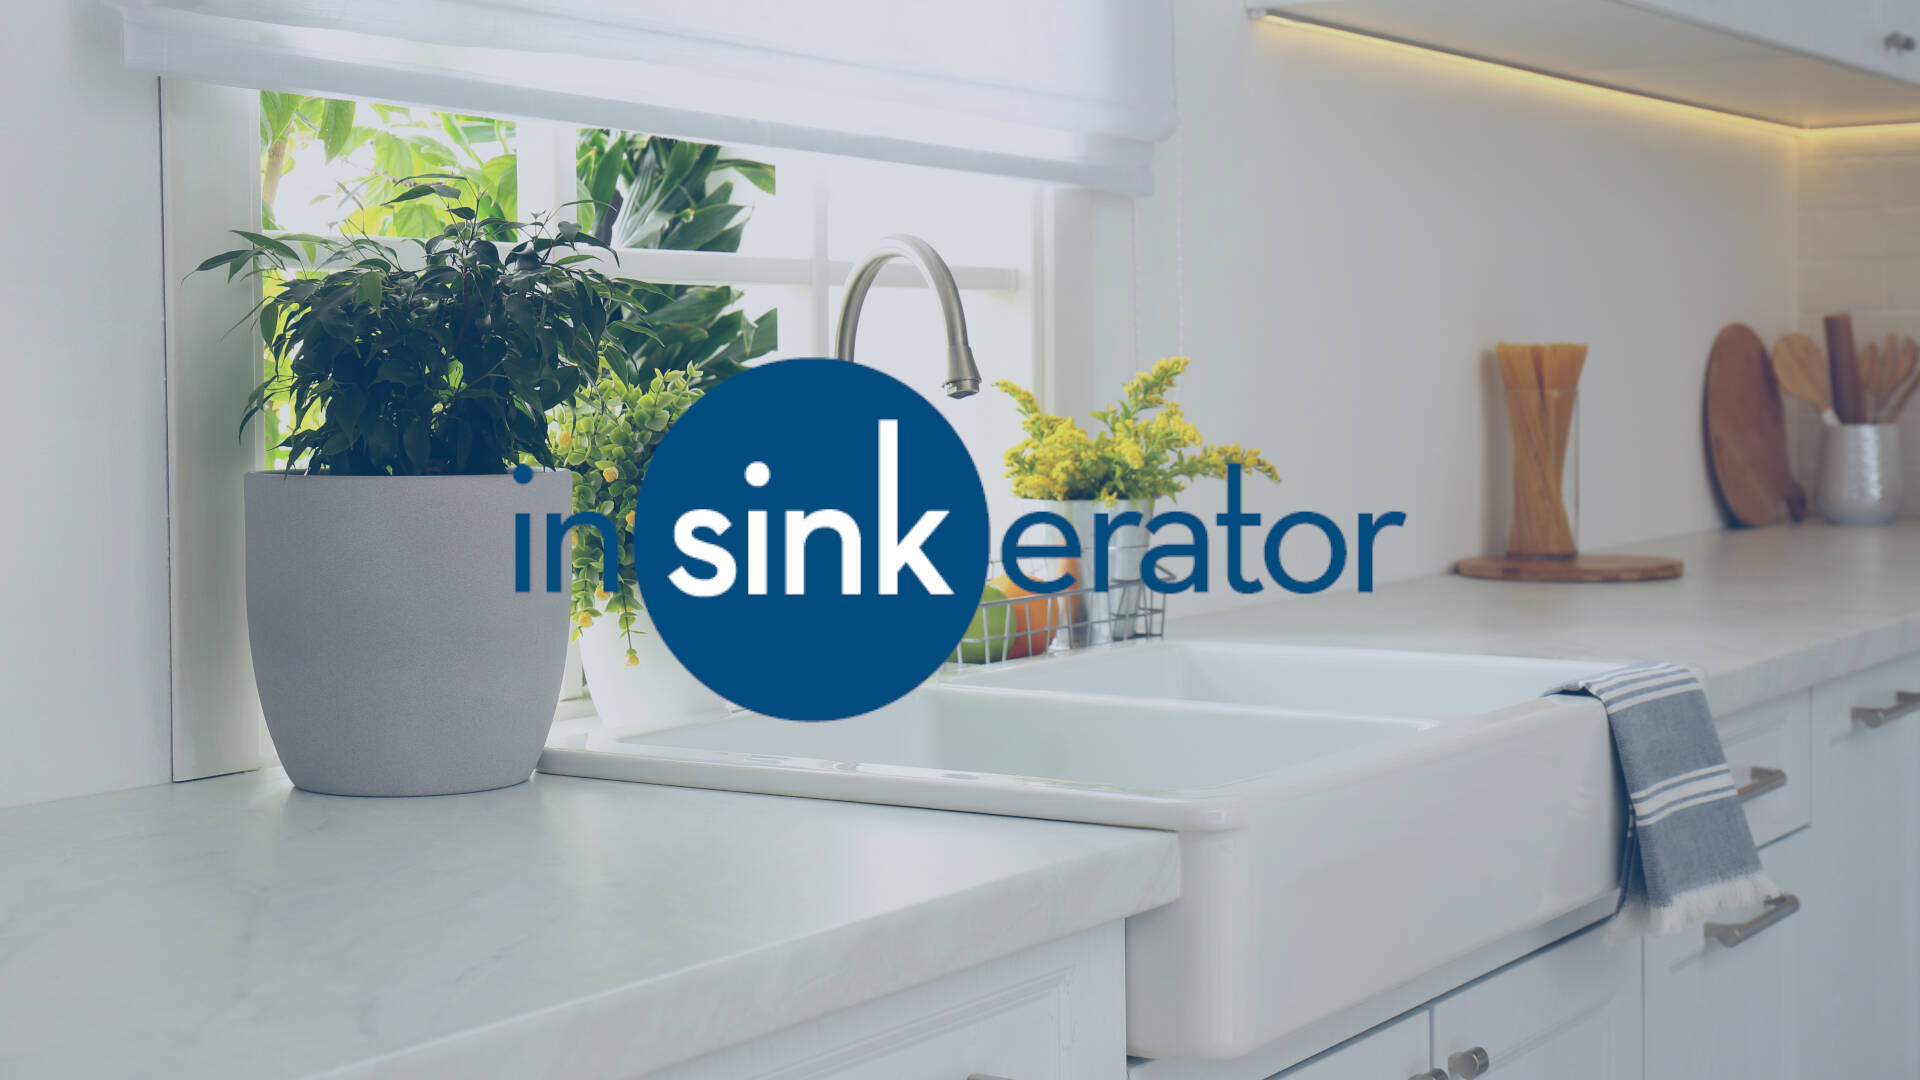 The best InSinkErator garbage disposals featured image